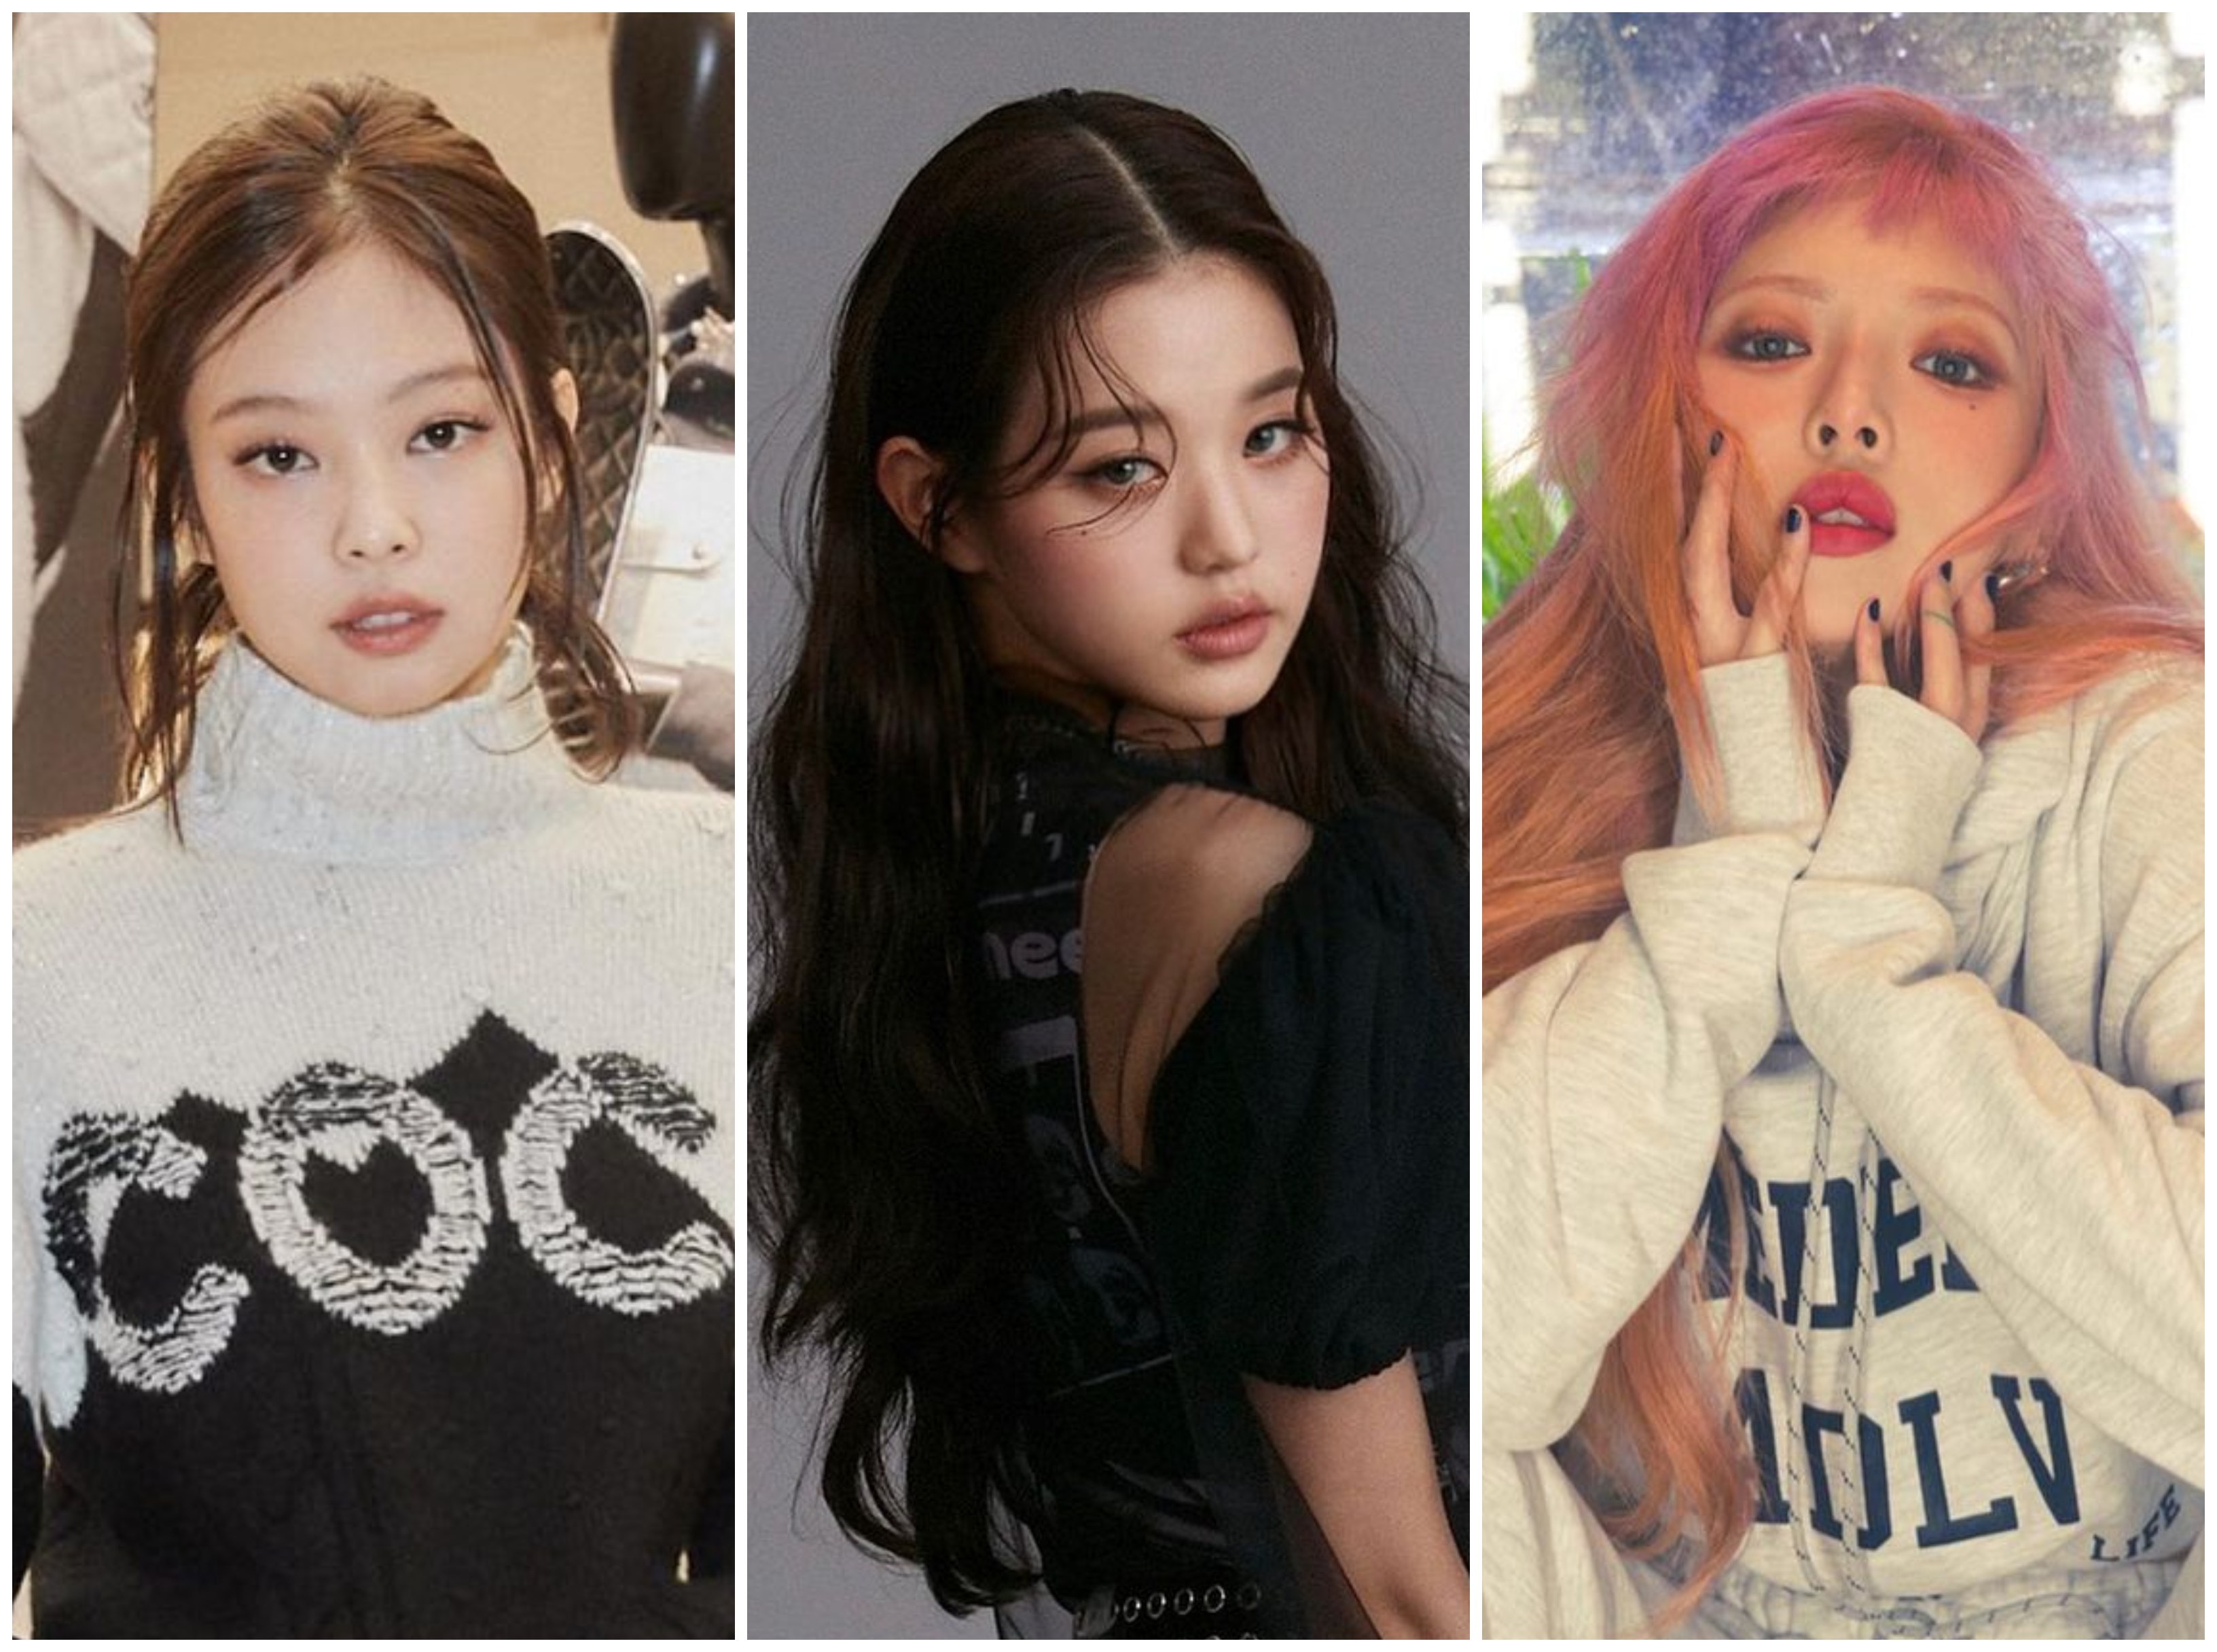 From Blackpink’s Jennie to Ive’s Wonyoung and former 4minute member Hyuna, fans think these K-pop stars got special treatment from their agencies. 
Photos: @jennierubyjane, @for_everyoung10, @hyuah_aa/Instagram